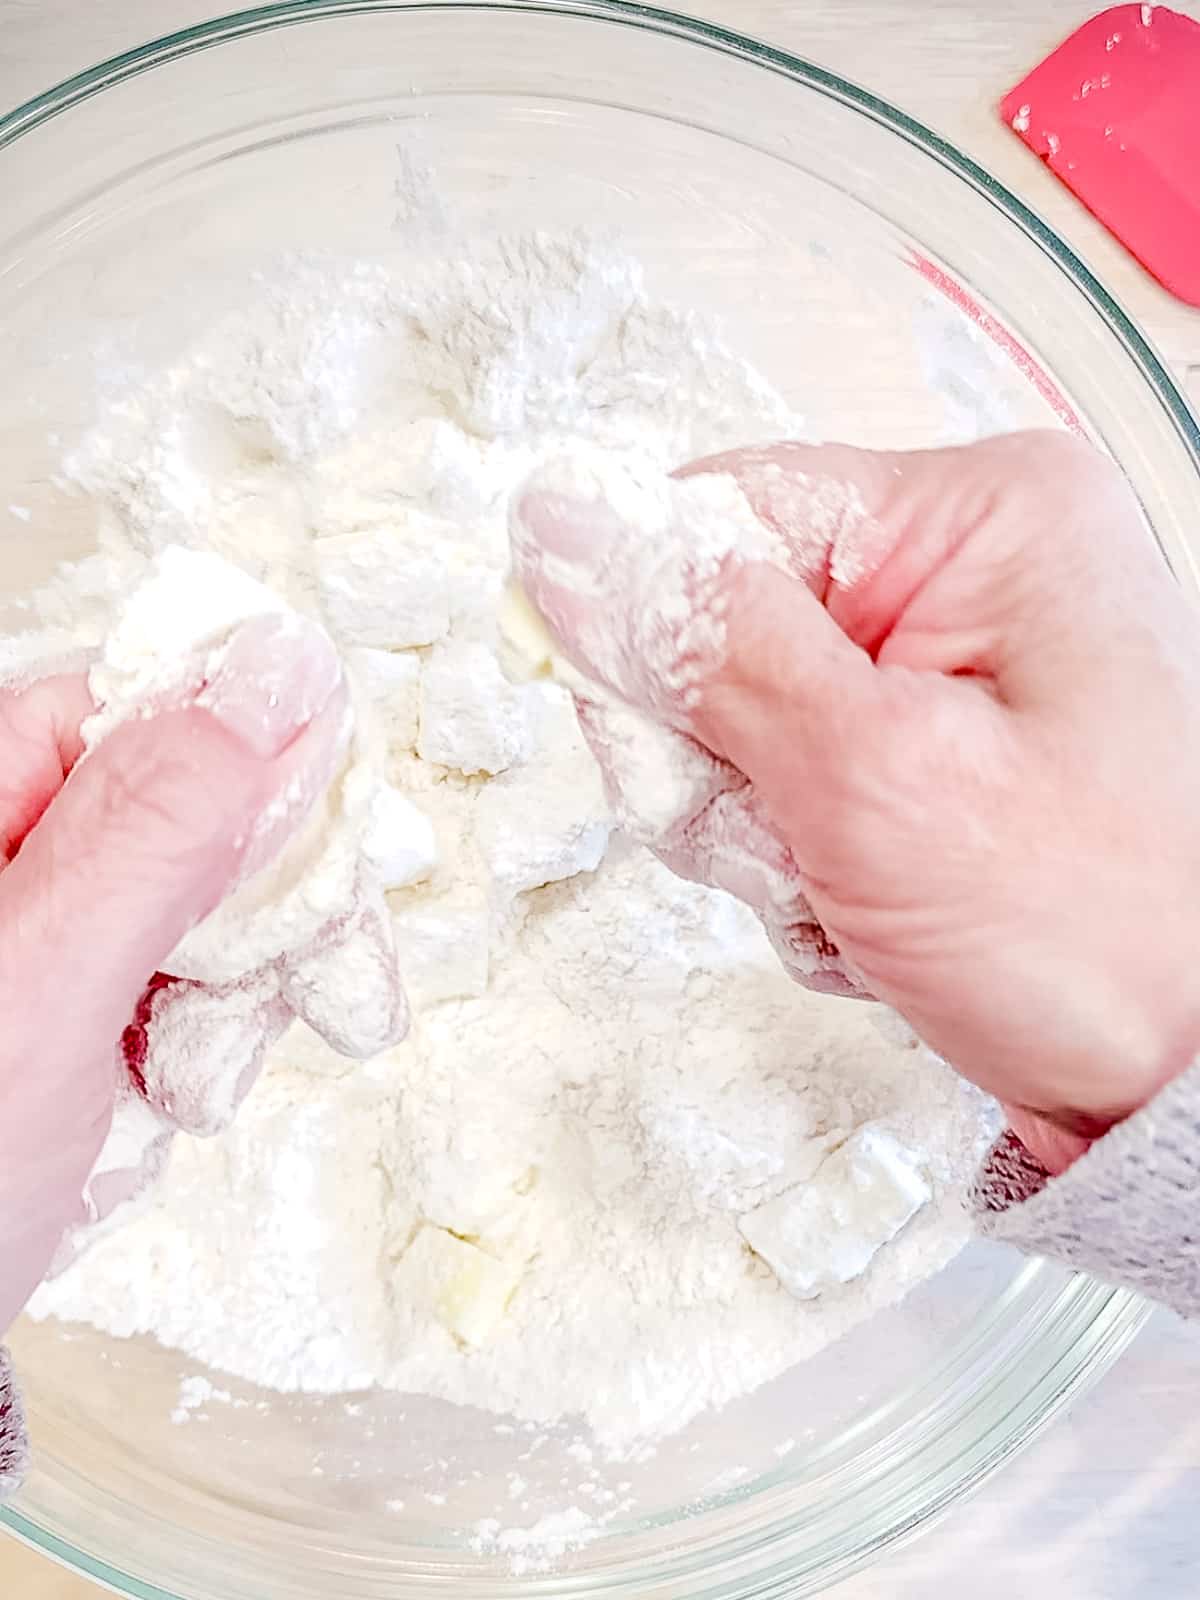 Rubbing butter and cream cheese into flour with fingers for biscuits.